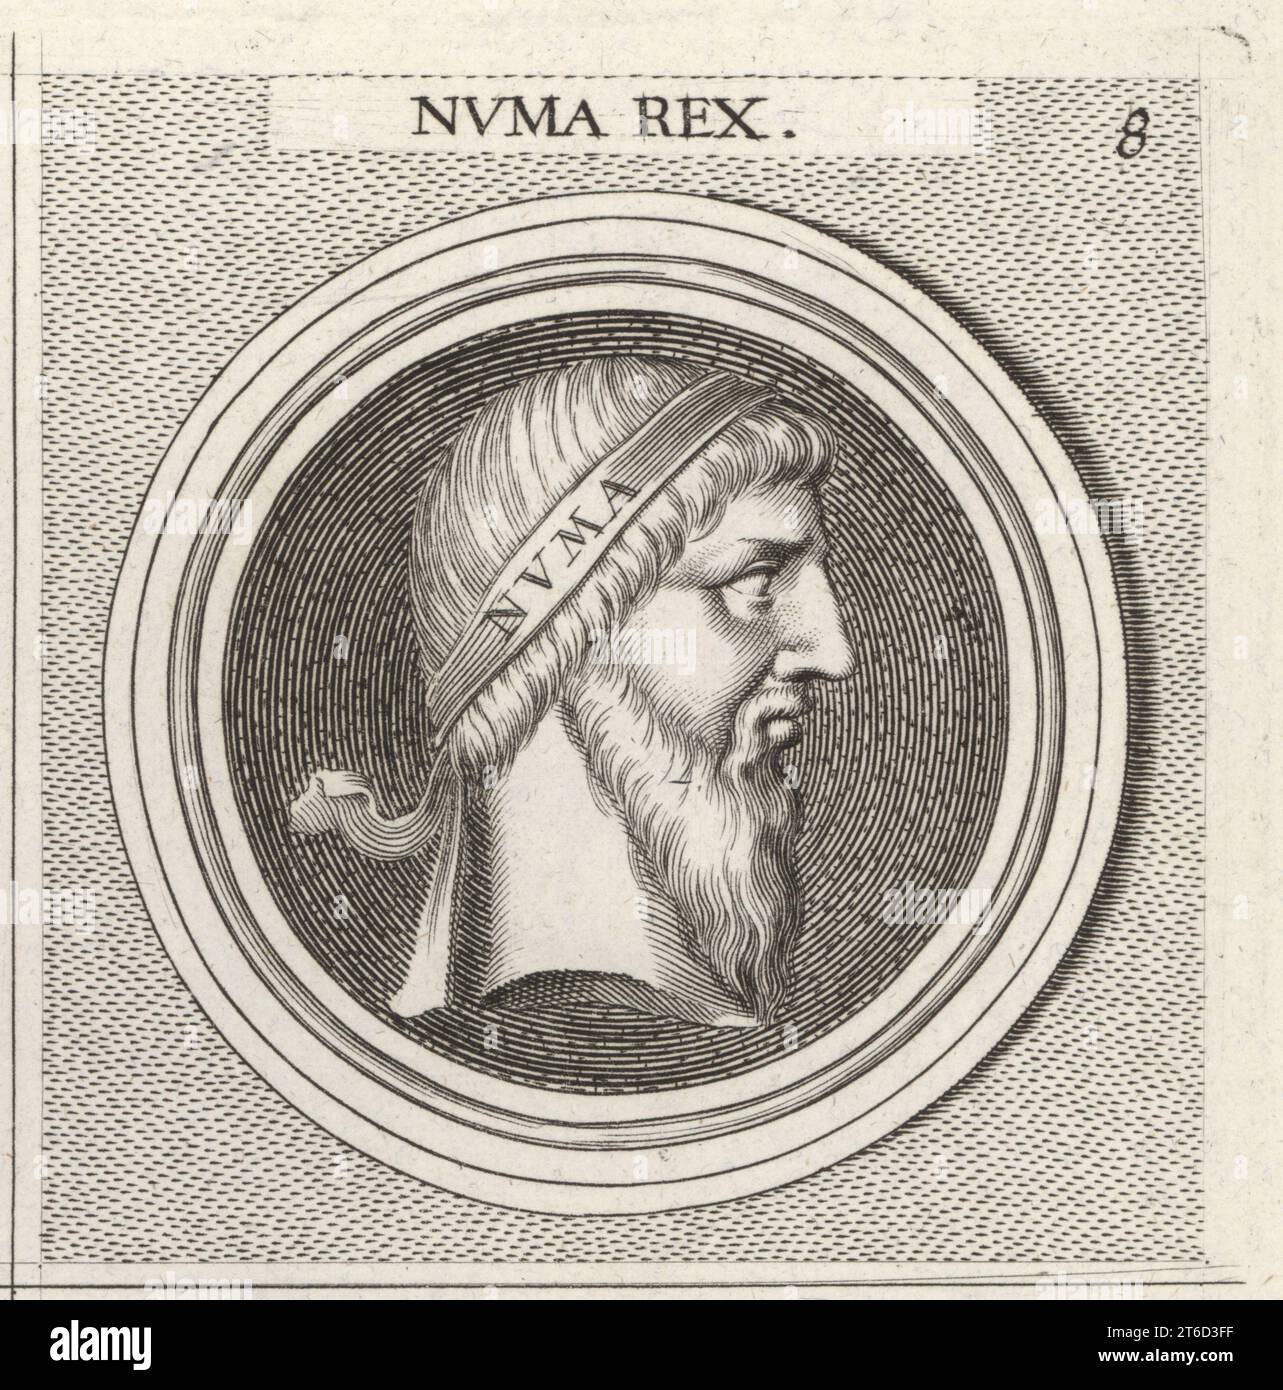 Numa Pompilius, legendary second king of Rome, c.753672 BC. Credited with the invention of the Roman calendar, Vestal Virgins, the cults of Mars, Jupiter and Romulus, and the office of pontifex maximus. Numa Rex. Copperplate engraving after an illustration by Joachim von Sandrart from his LAcademia Todesca, della Architectura, Scultura & Pittura, oder Teutsche Academie, der Edlen Bau- Bild- und Mahlerey-Kunste, German Academy of Architecture, Sculpture and Painting, Jacob von Sandrart, Nuremberg, 1675. Stock Photo